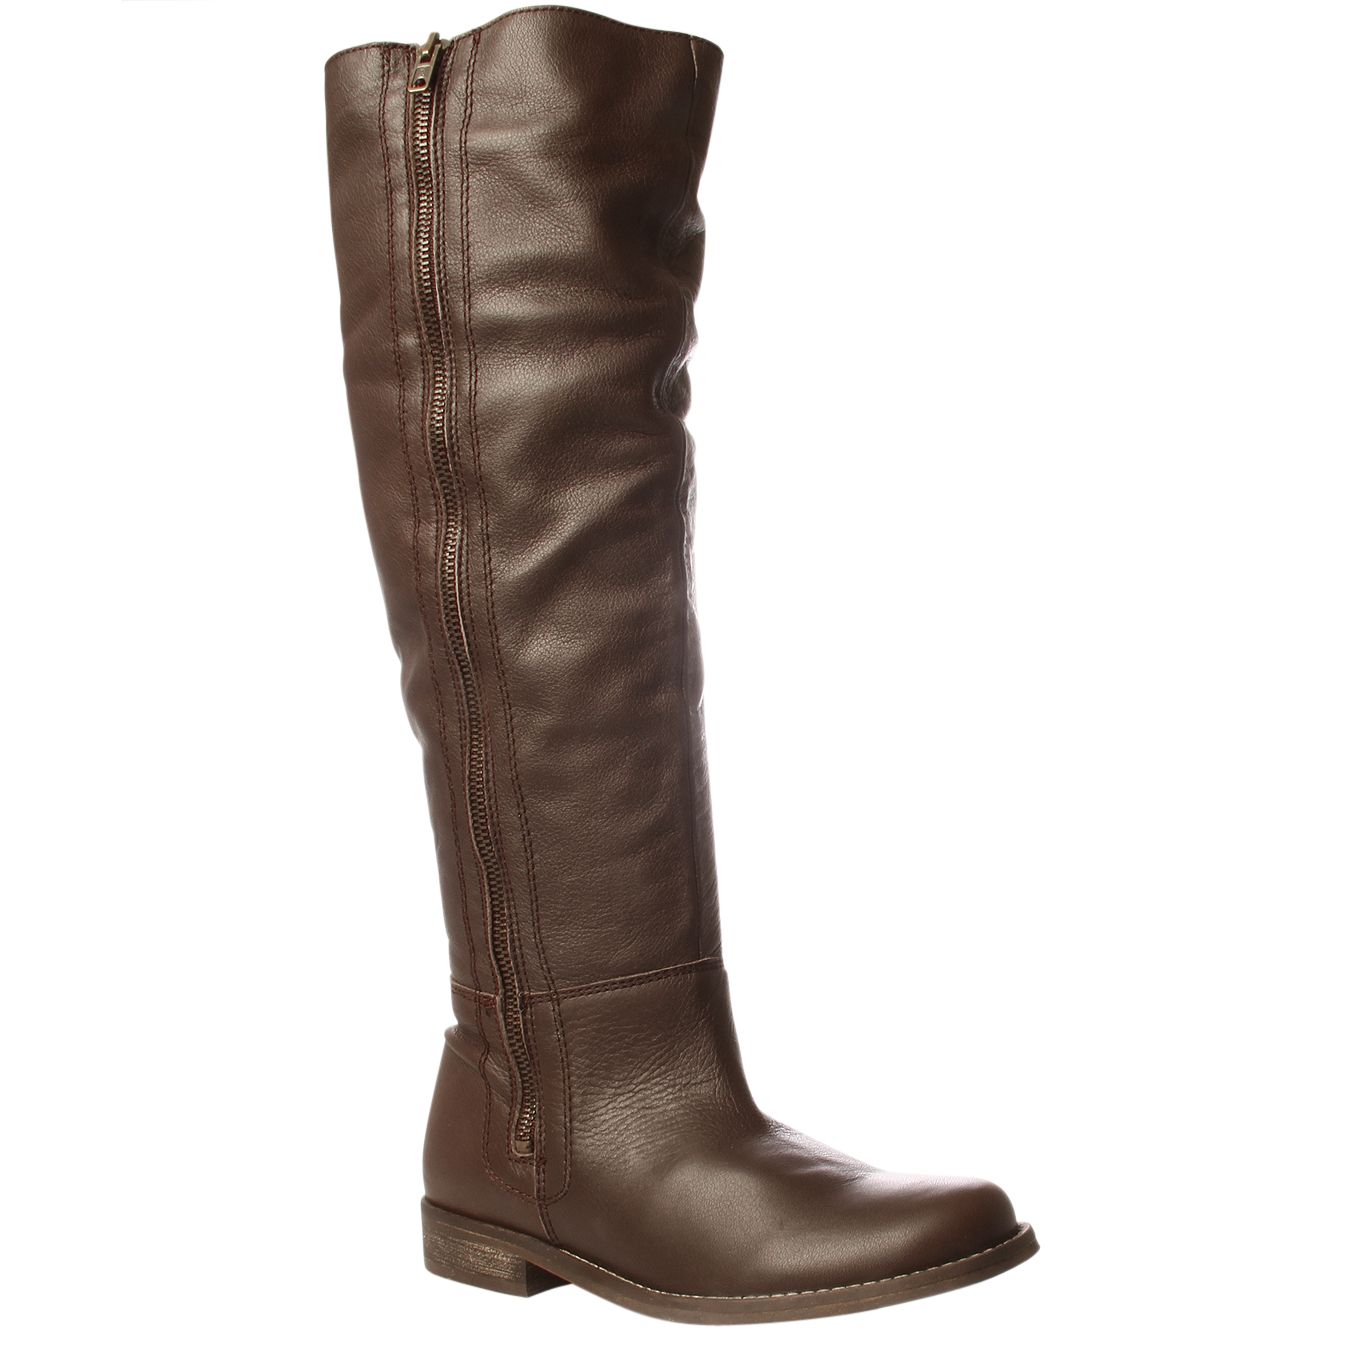 KG by Kurt Geiger Whitby Flat Leather Boots, Brown at John Lewis